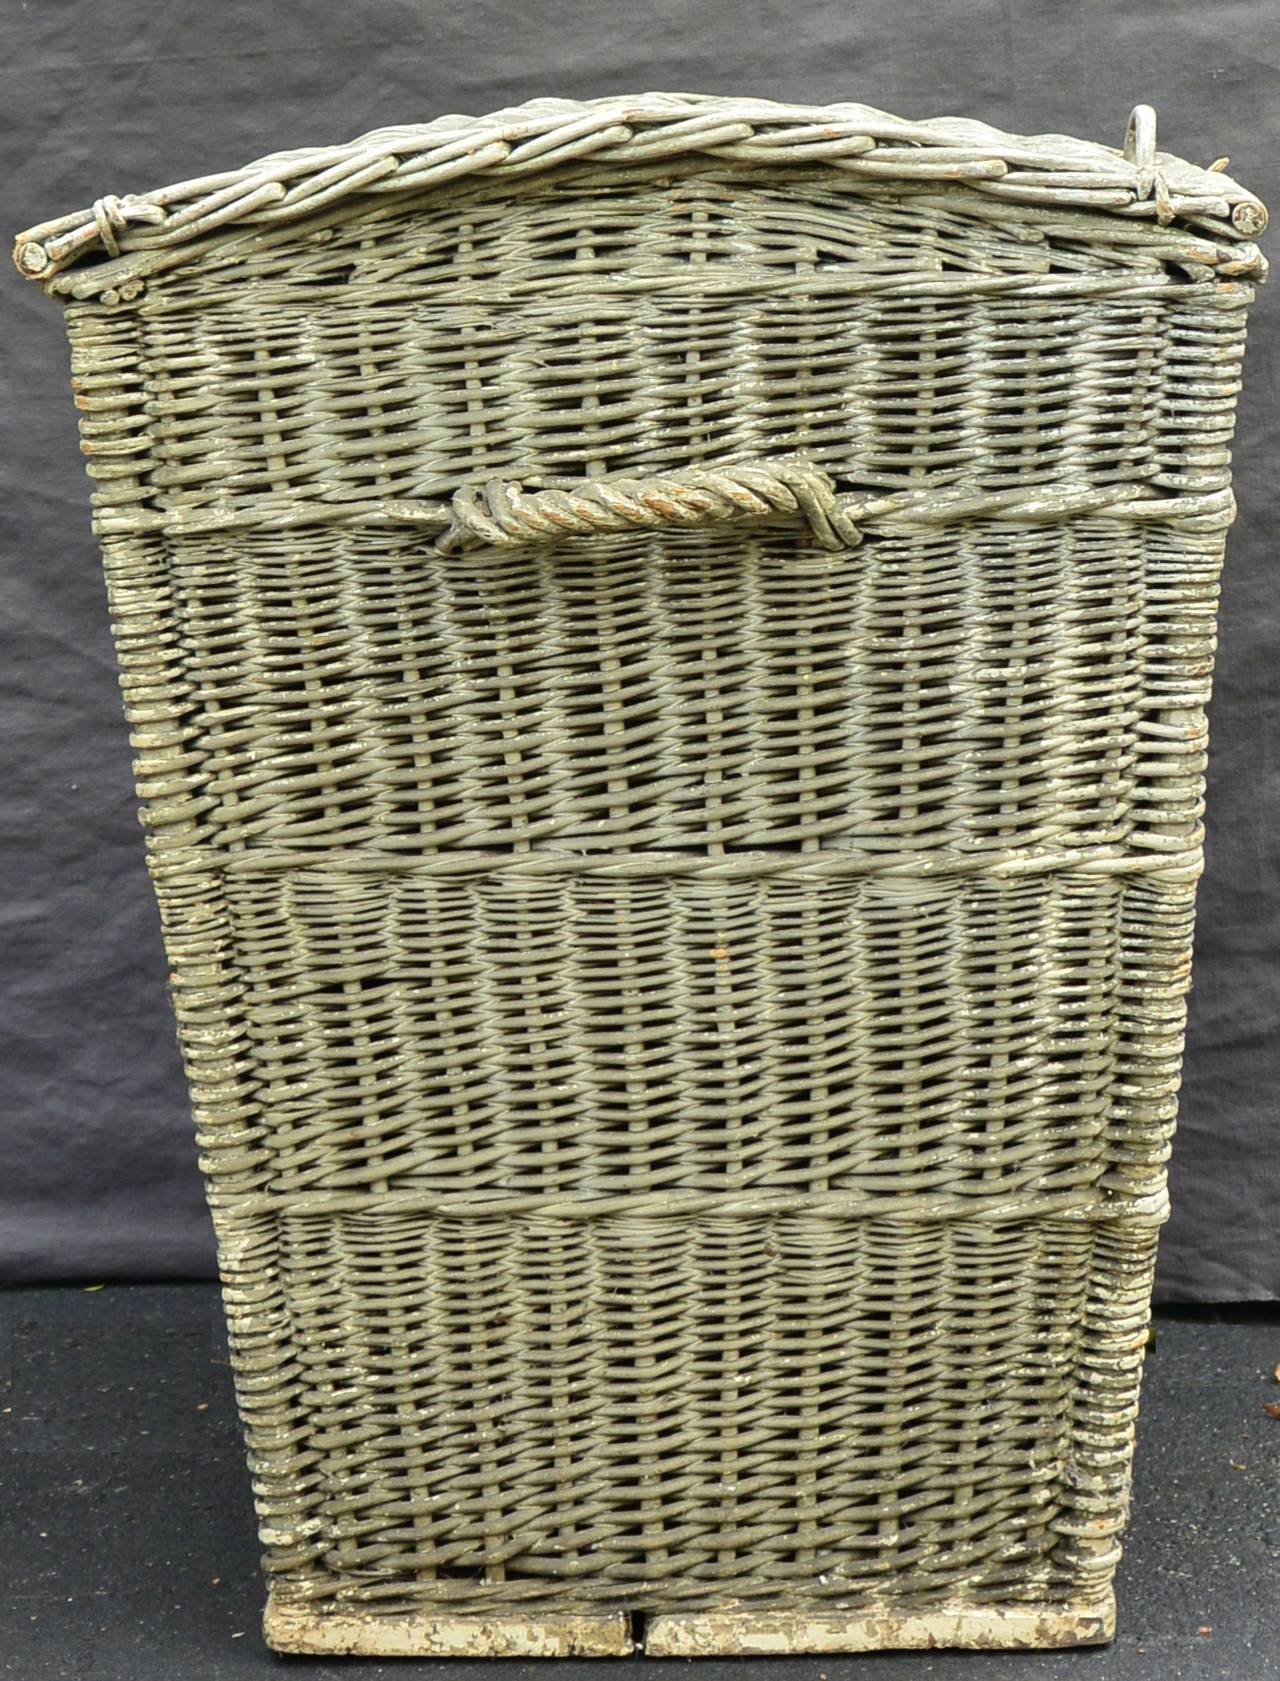 Large American vintage lidded wicker hamper with handles on wood base; painted in pale green milk-wash, and perfect for laundry and hide and seek. 
Dimension: 24